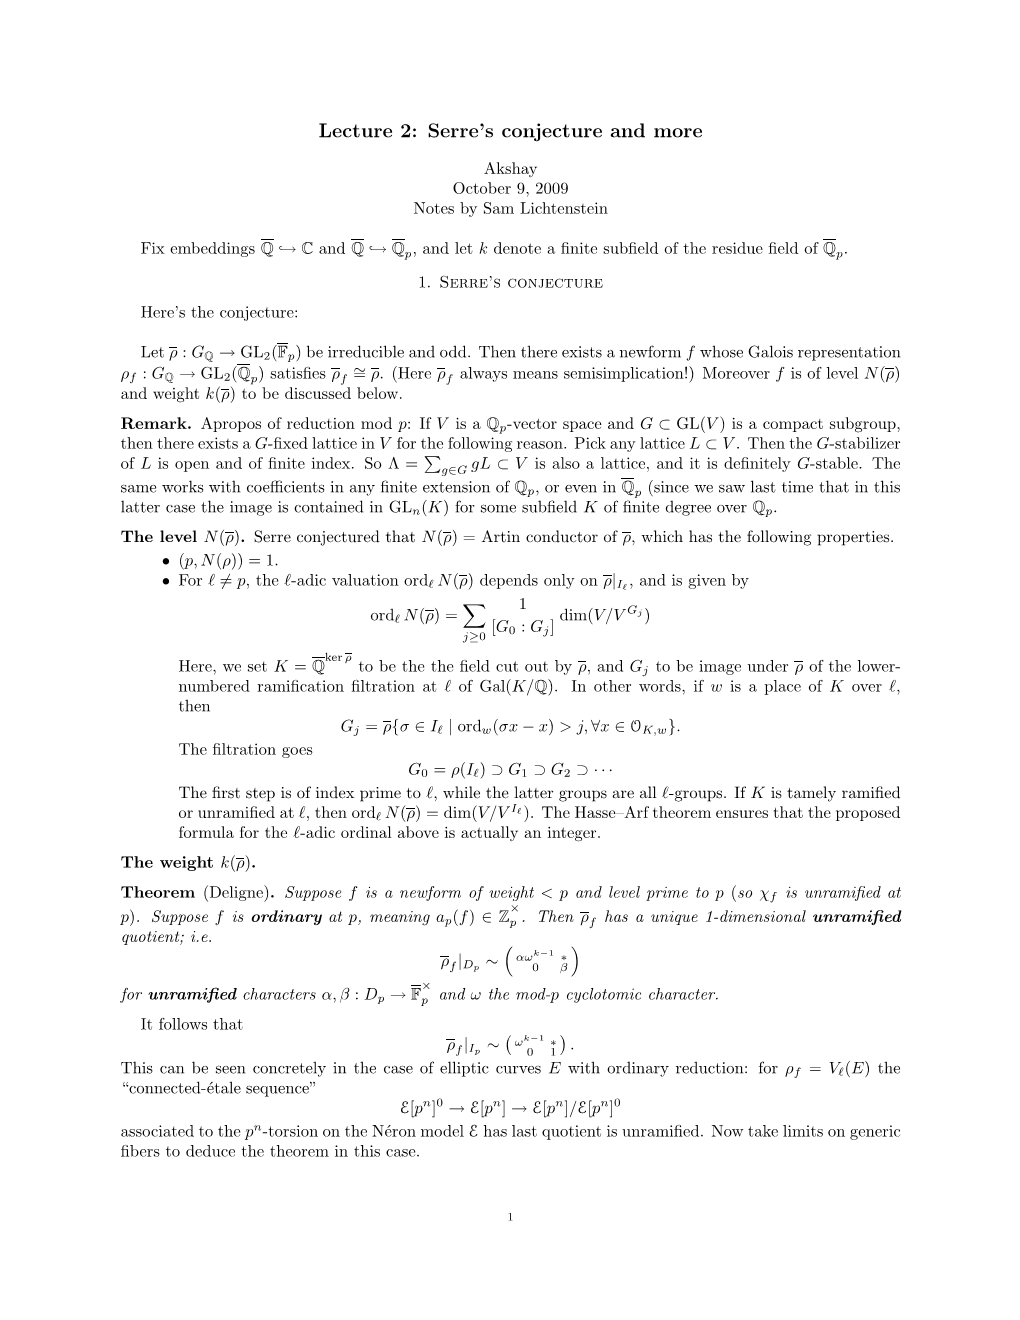 Lecture 2: Serre's Conjecture and More